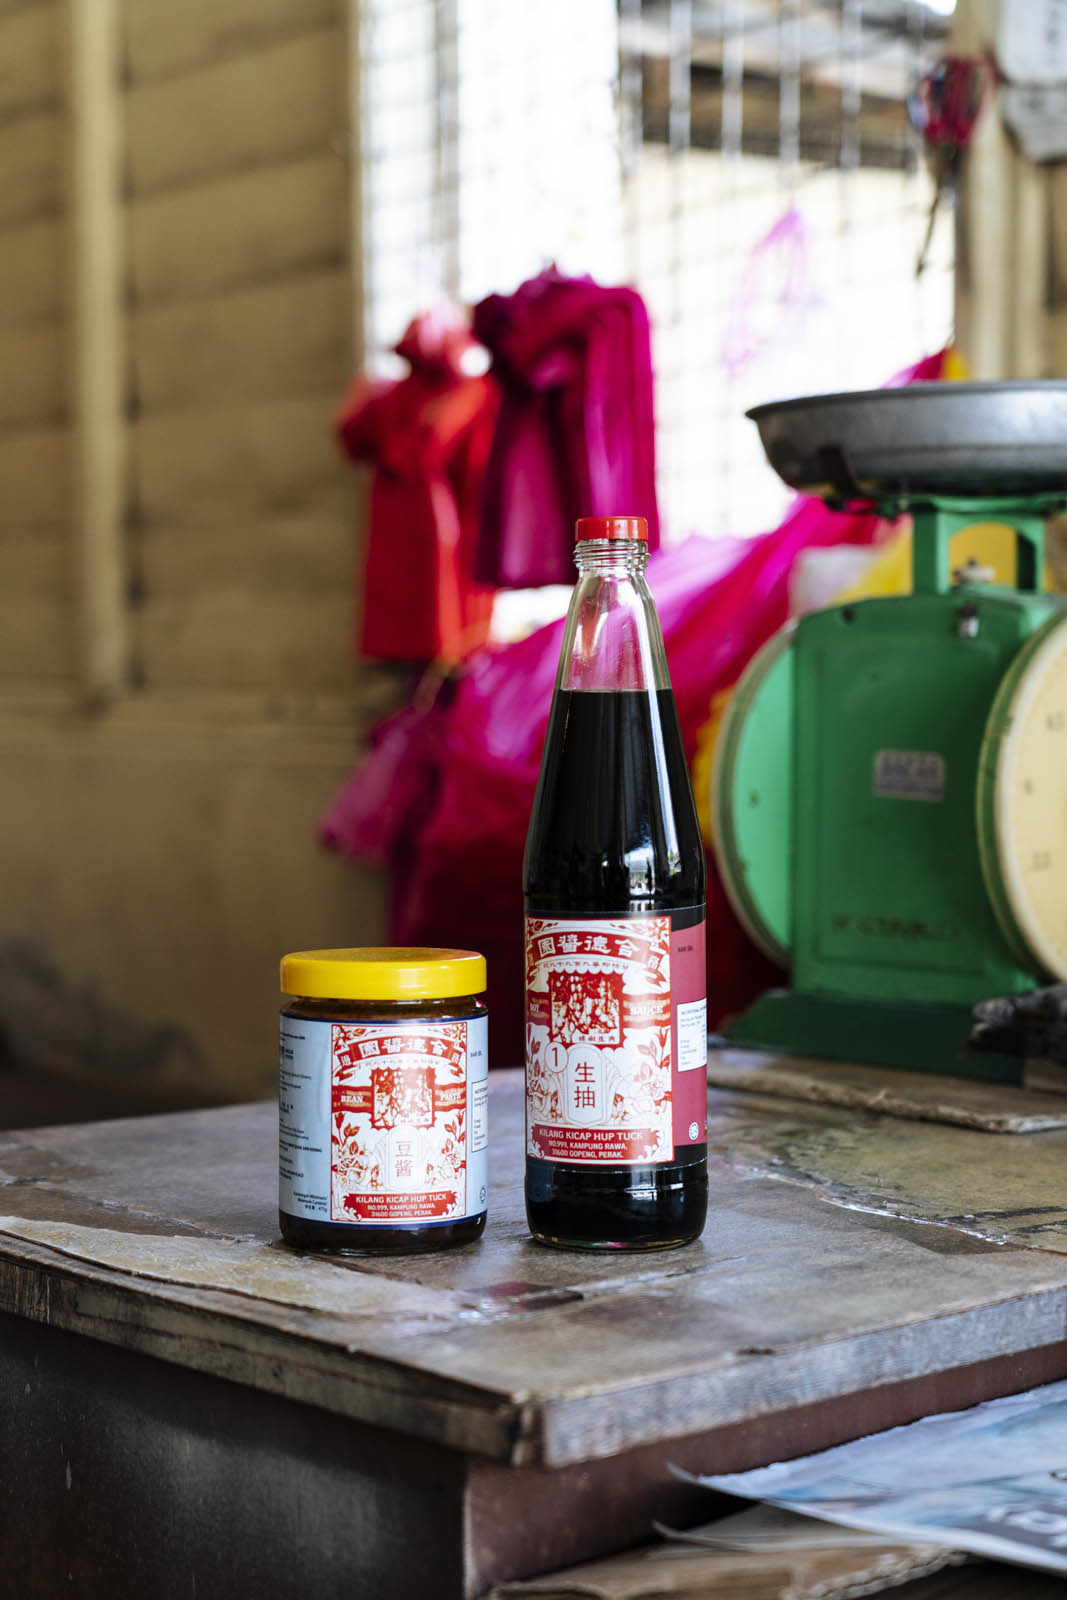 Hup Teck Soy Sauce products. Photo by Teoh Eng Hooi.